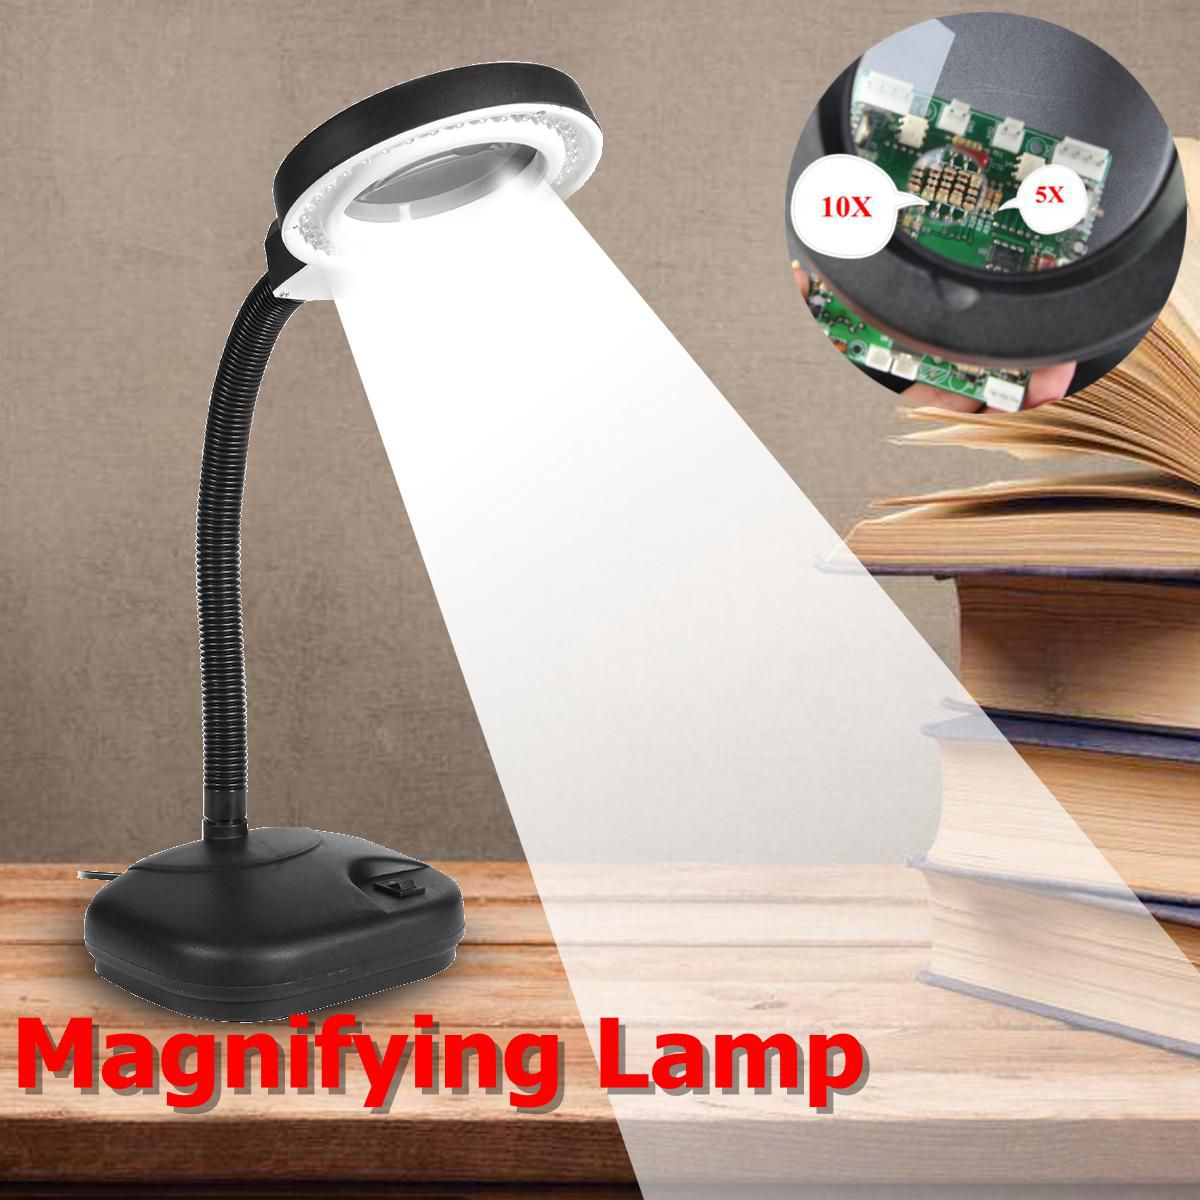 5x 10x Magnifying Glass Magnifier, Table Magnifier Lamp 10x